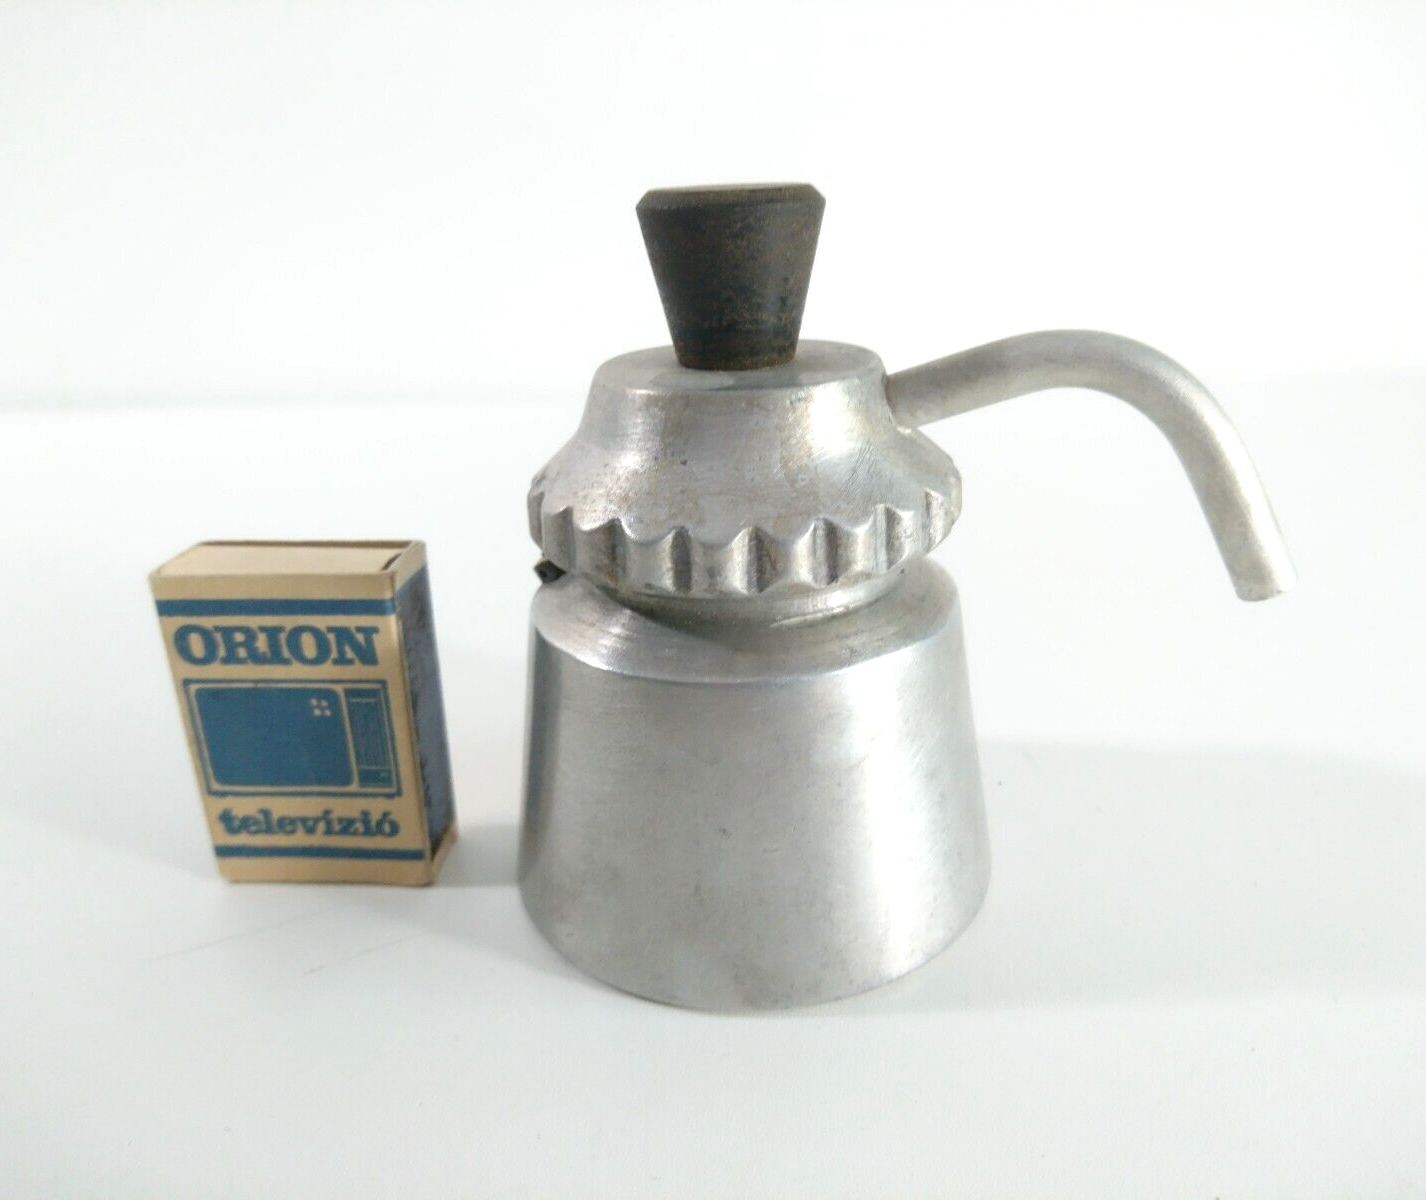 Vintage Mini Coffee Maker, 2 cups Espresso, For Camping, Hiking, 1960s Hungary